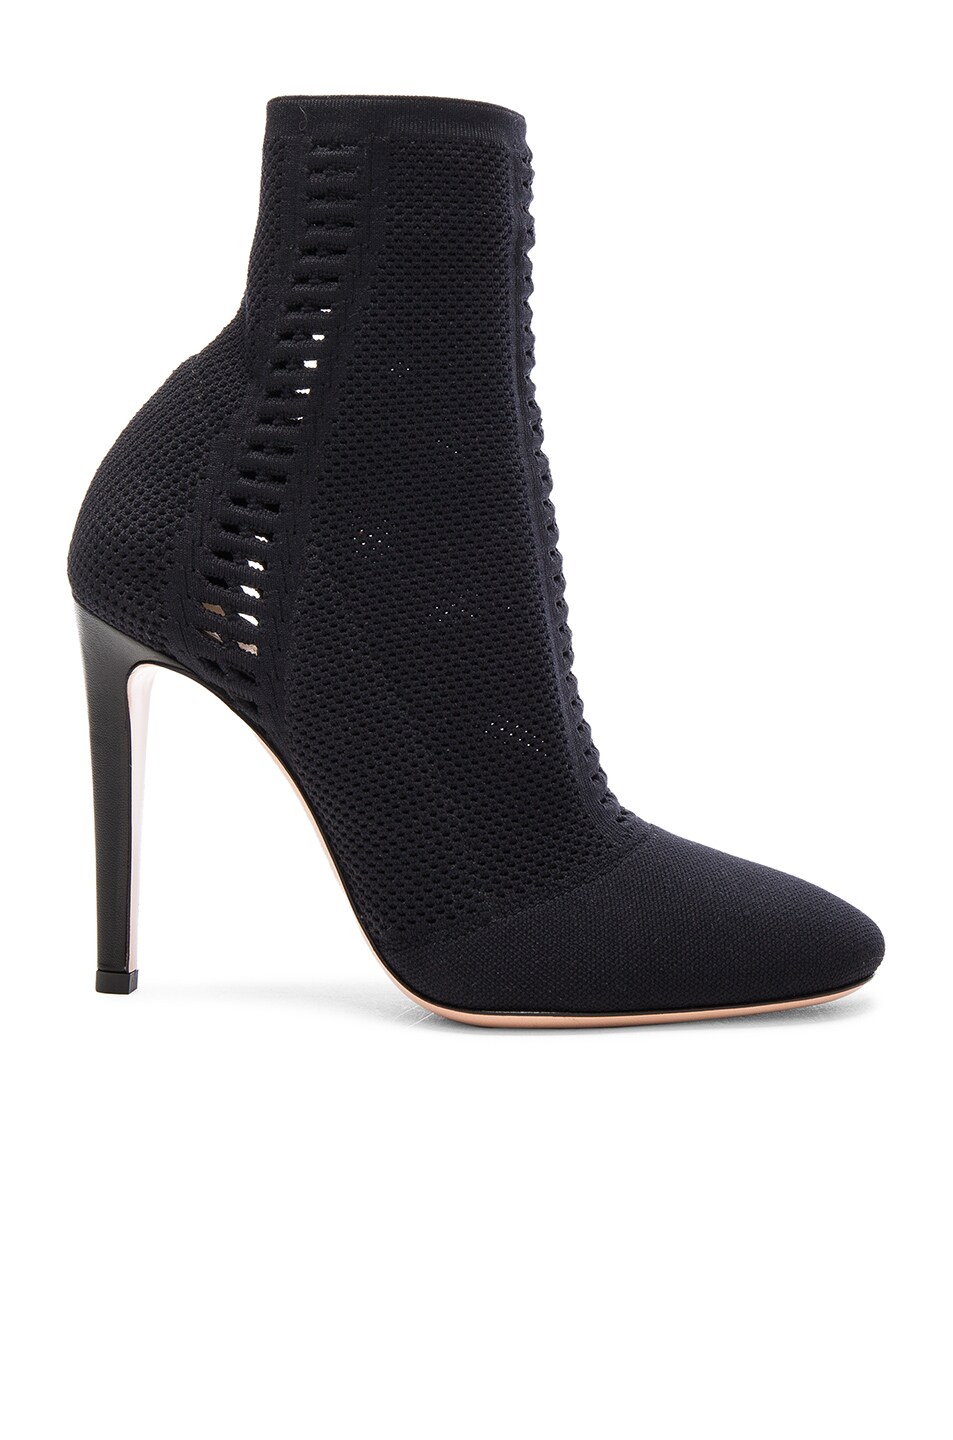 Image 1 of Gianvito Rossi Knit Booties in Black